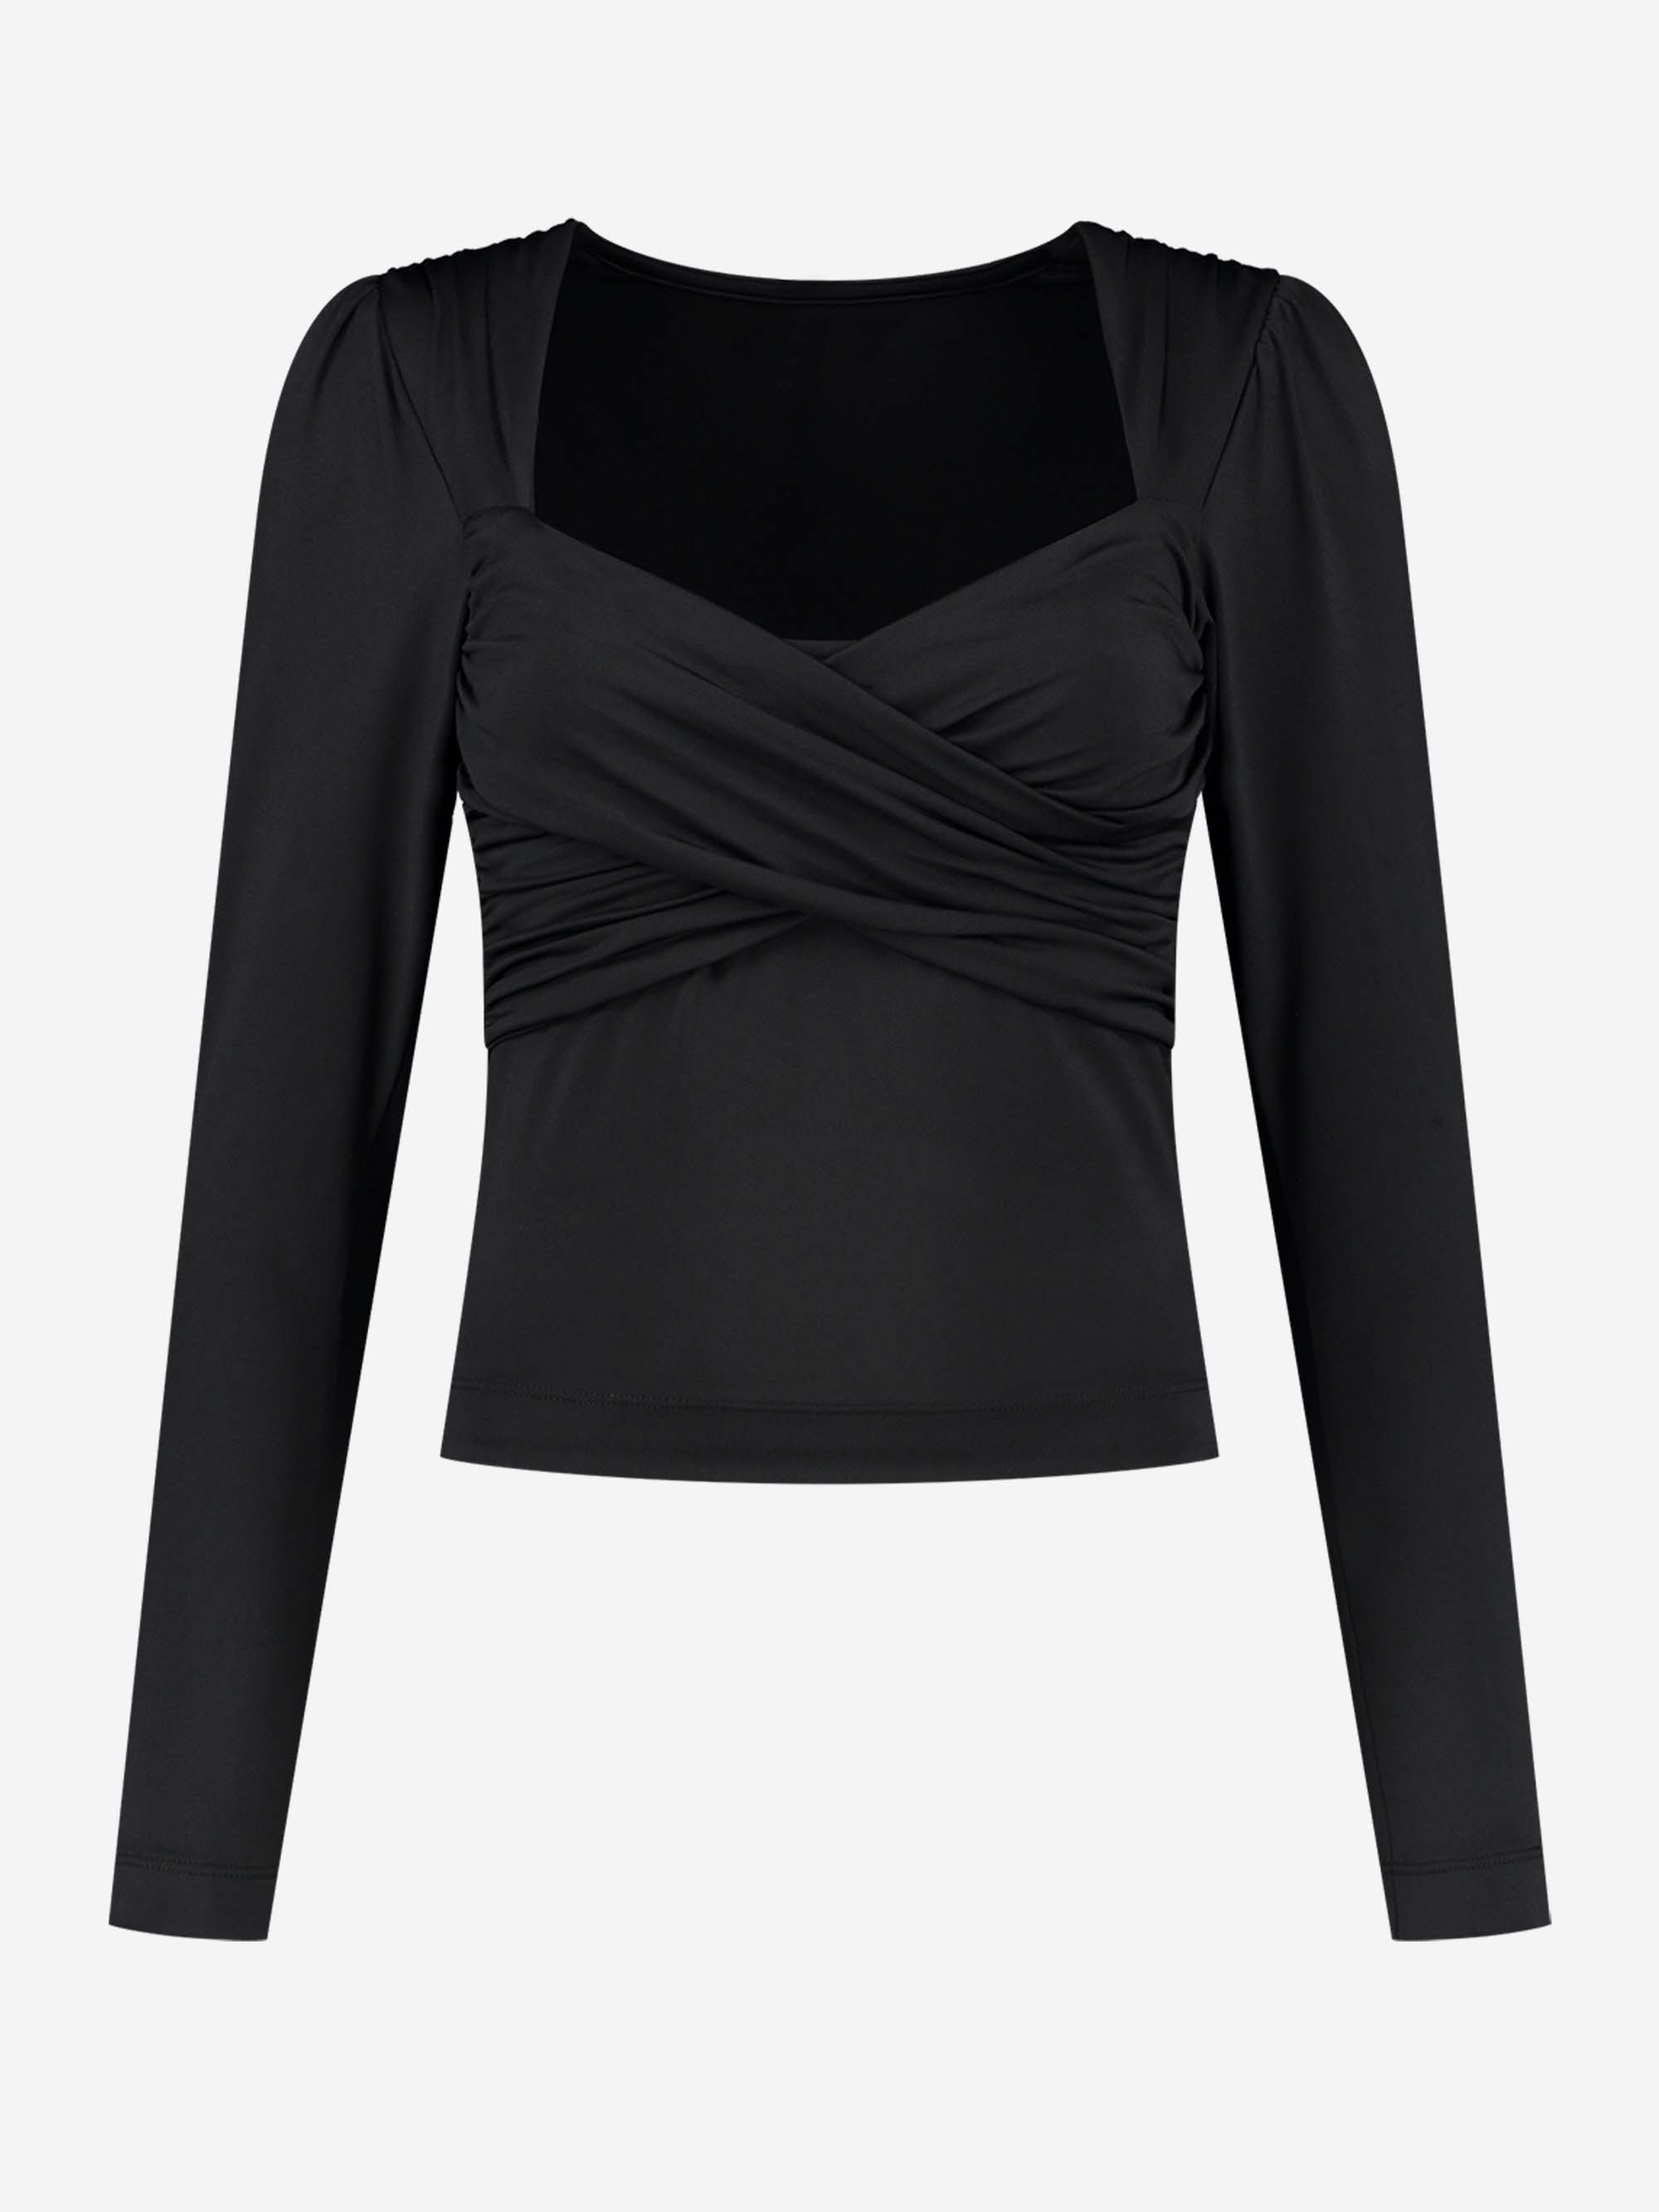 Fitted top with crossed neckline